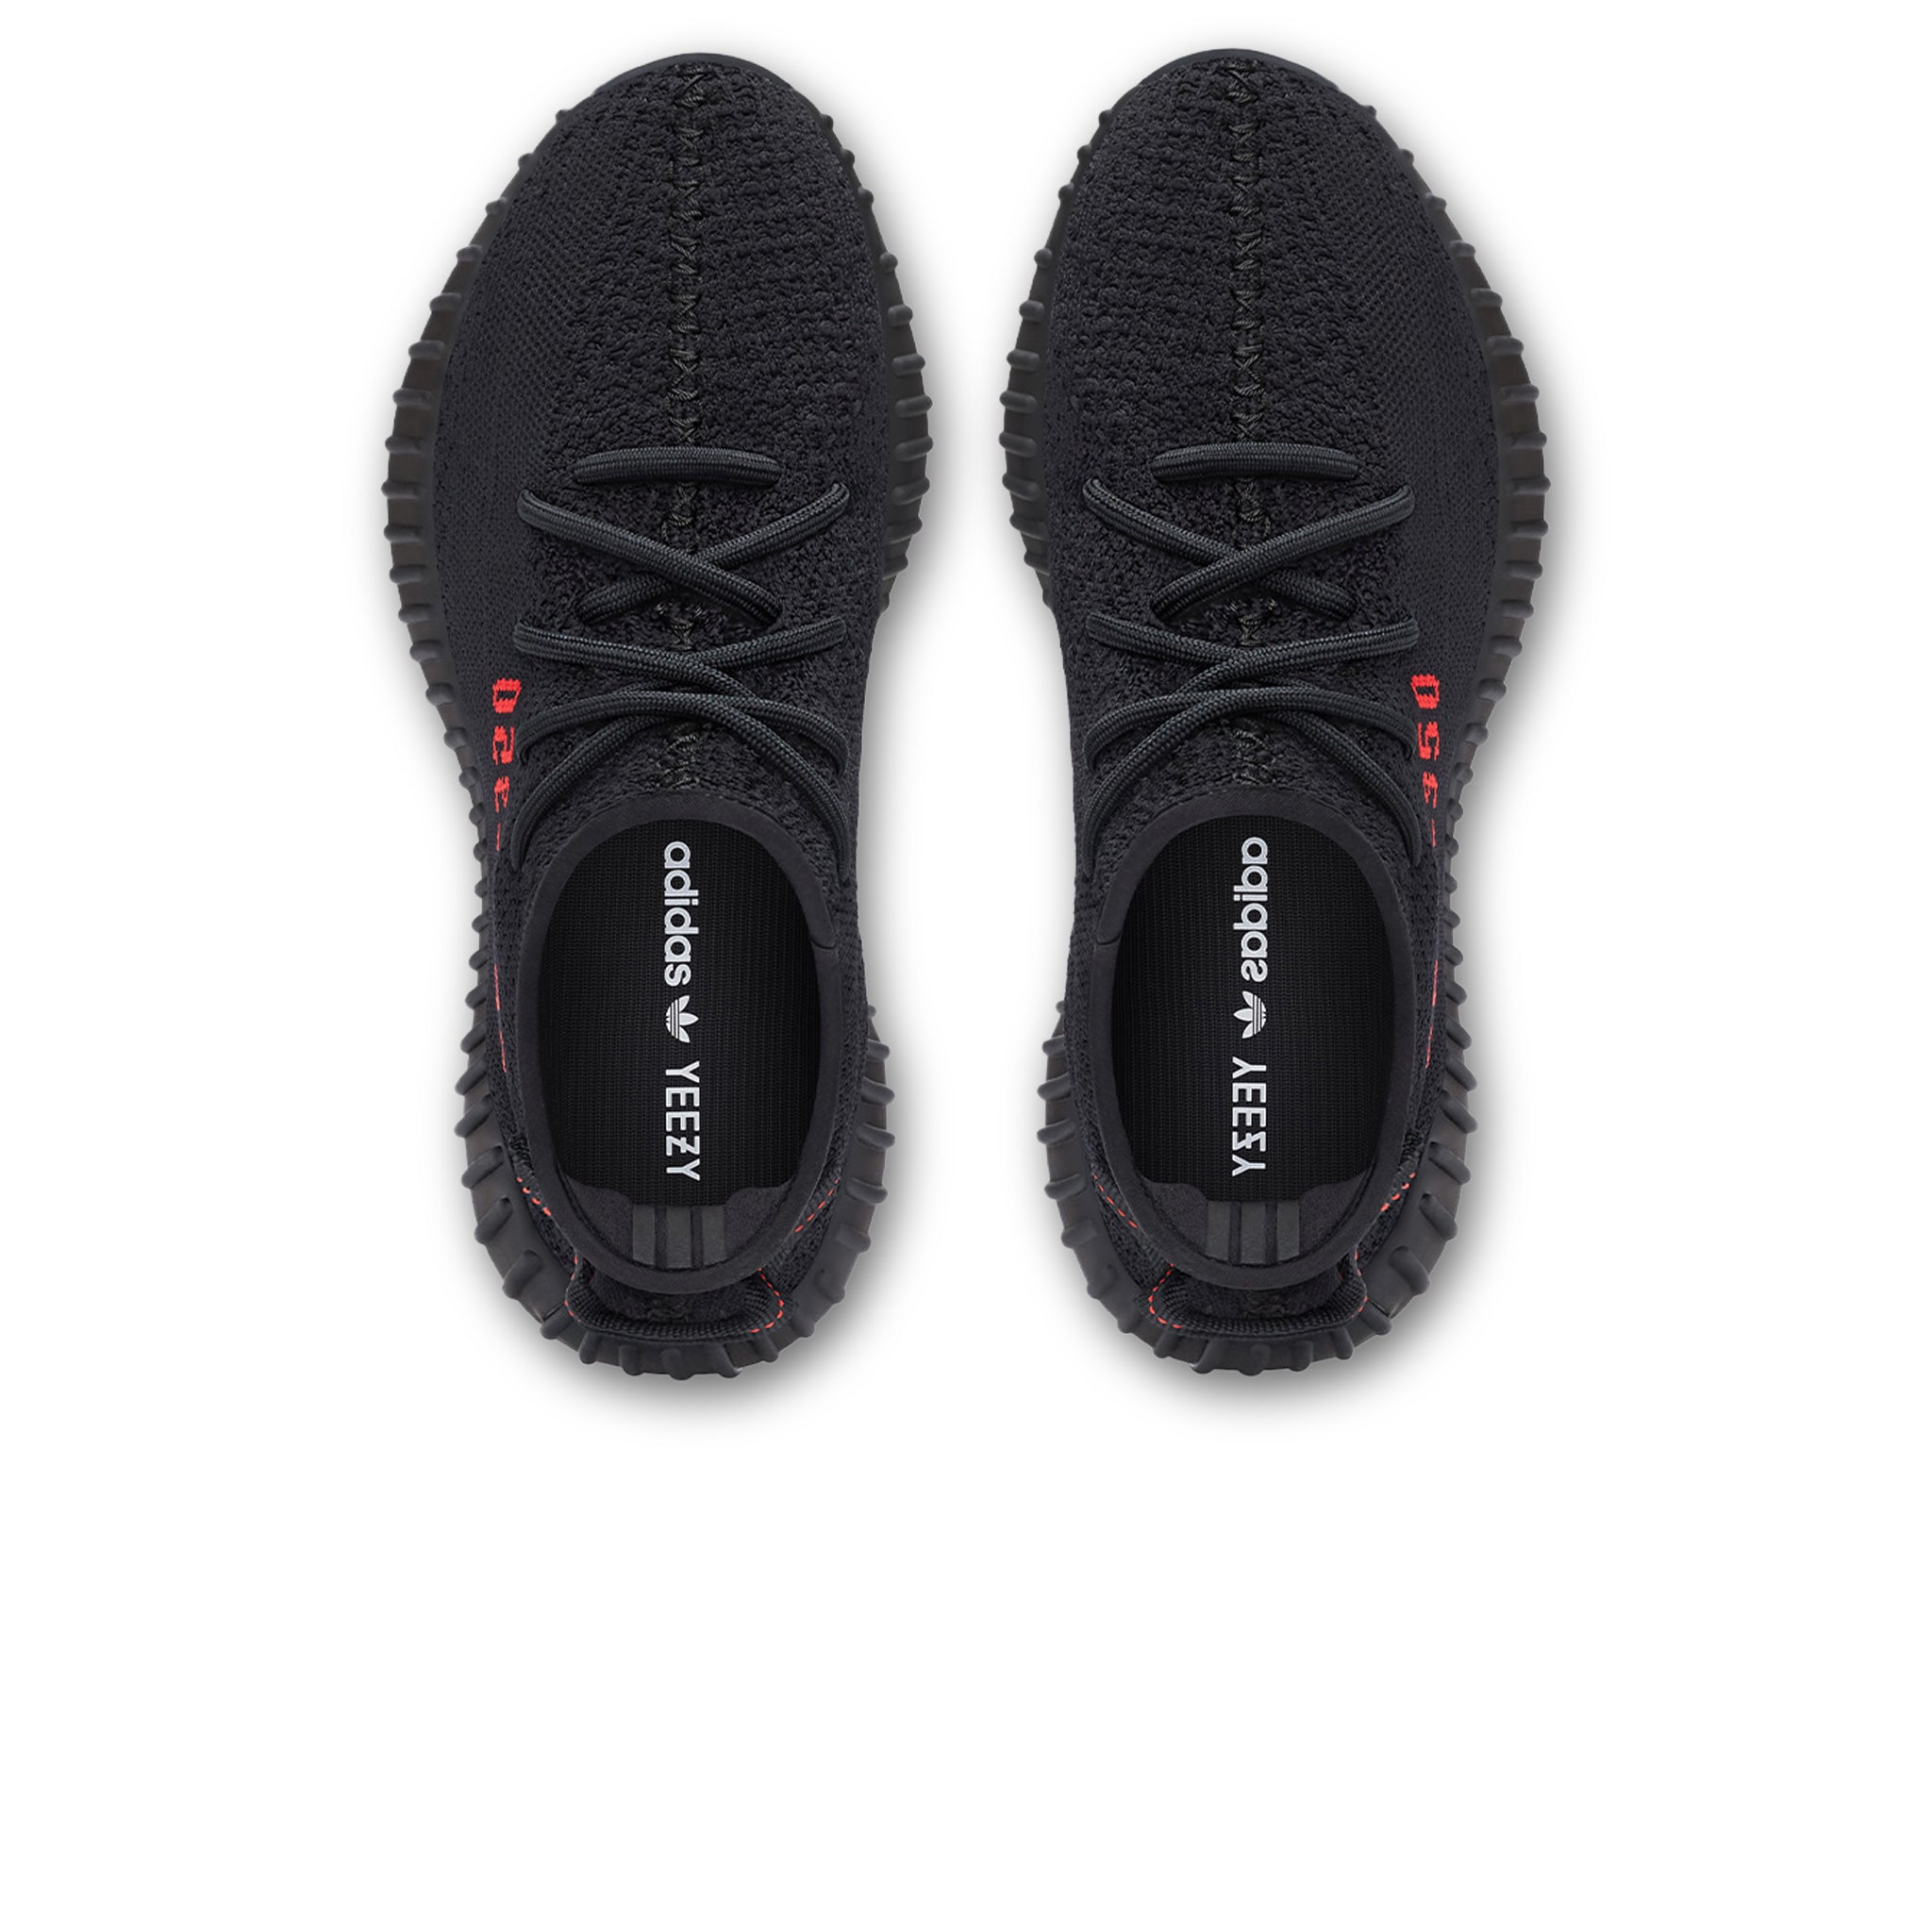 Top down view of Adidas Yeezy Boost 350 V2 Bred Core Black Red CP9652